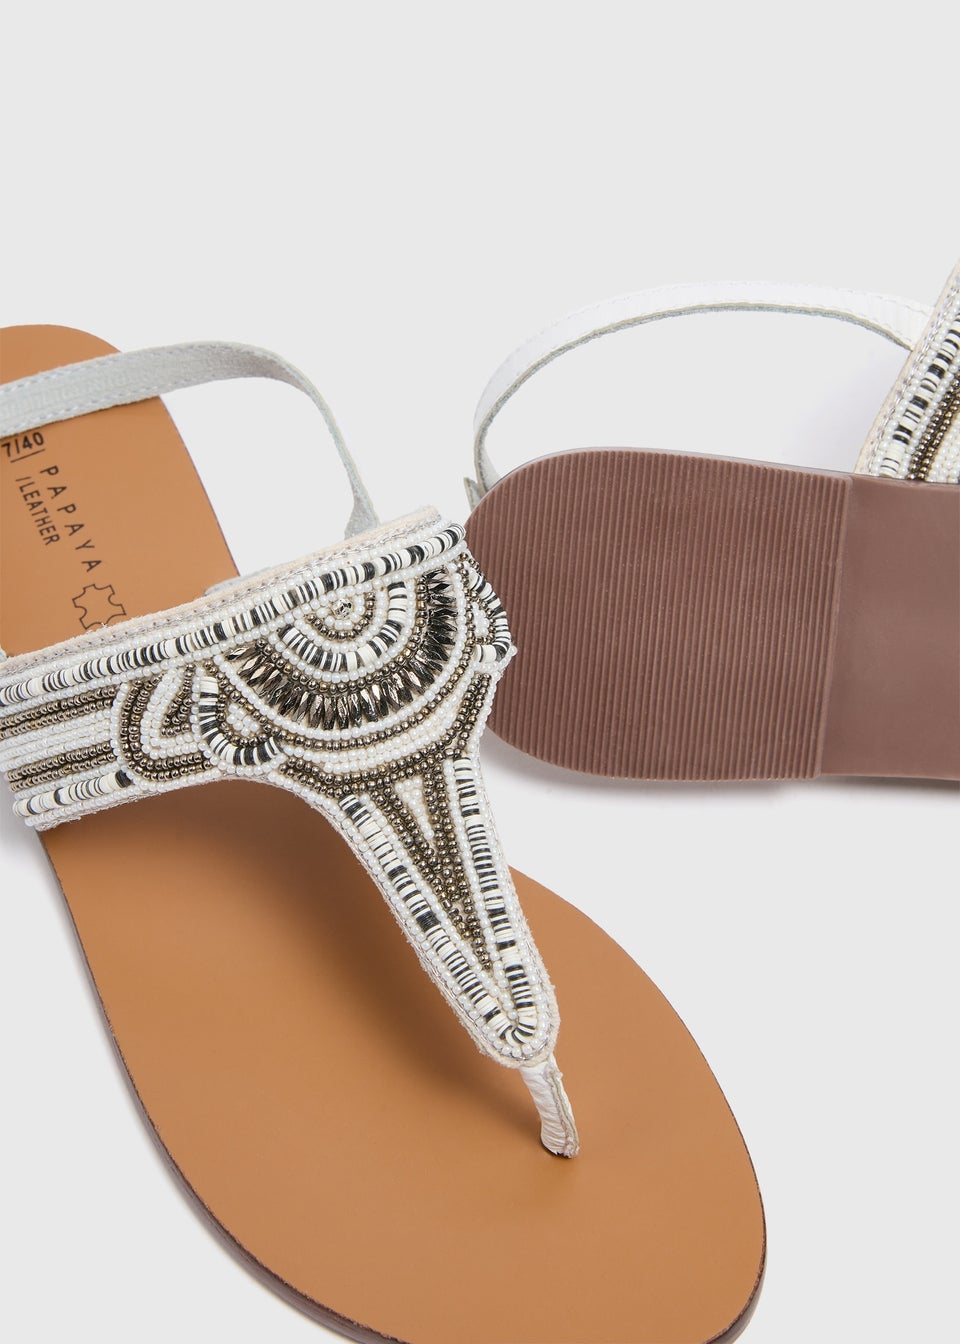 White Leather Flat Sandals